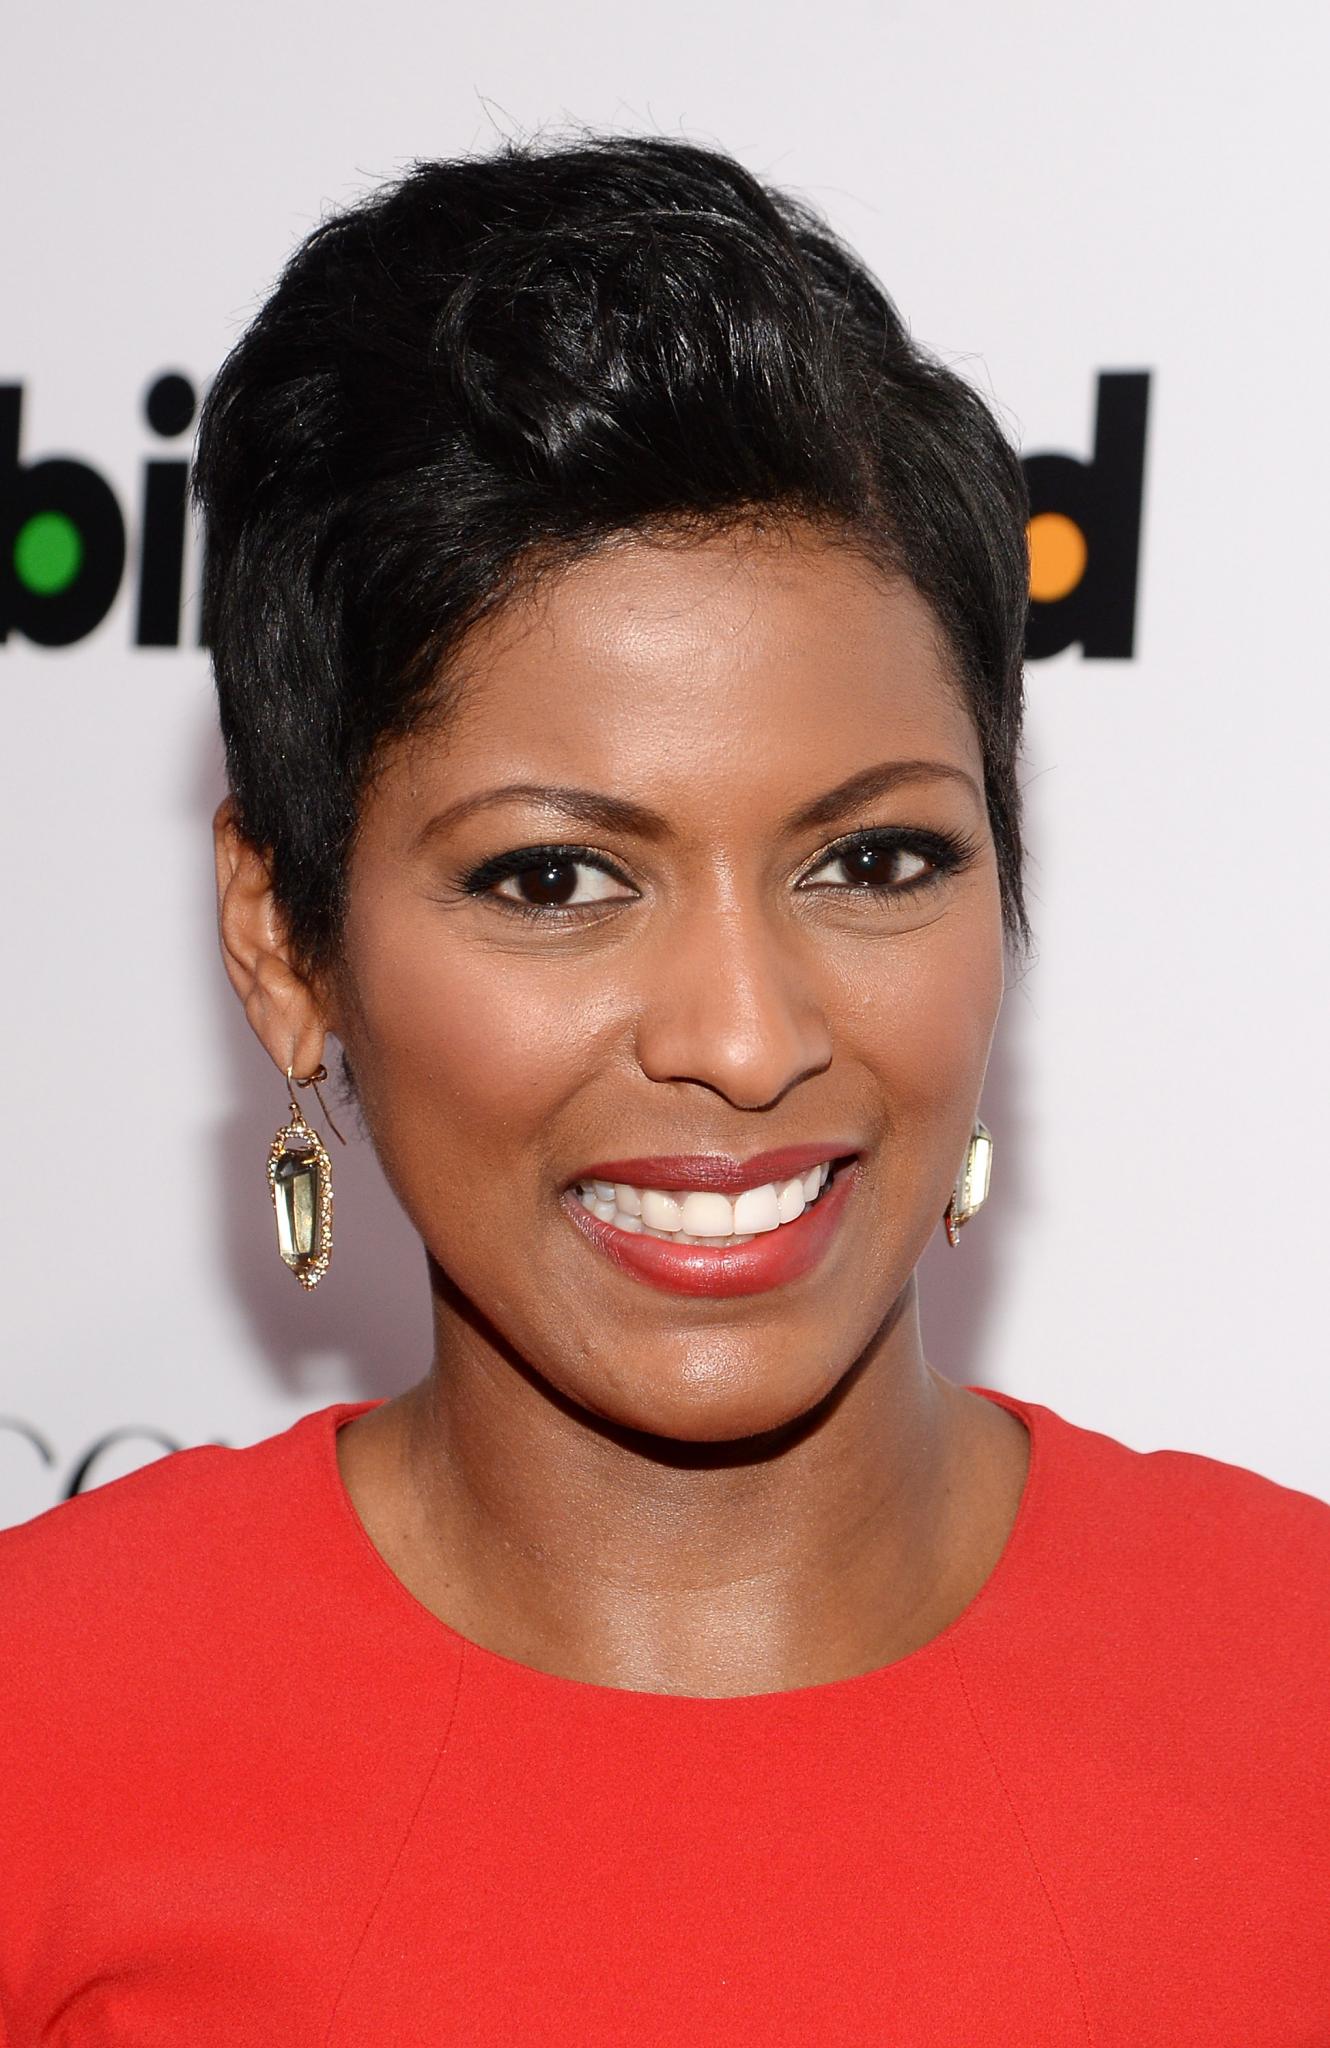 EXCLUSIVE: Tamron Hall on Being First Black Woman To Co-Anchor 'Today' Show